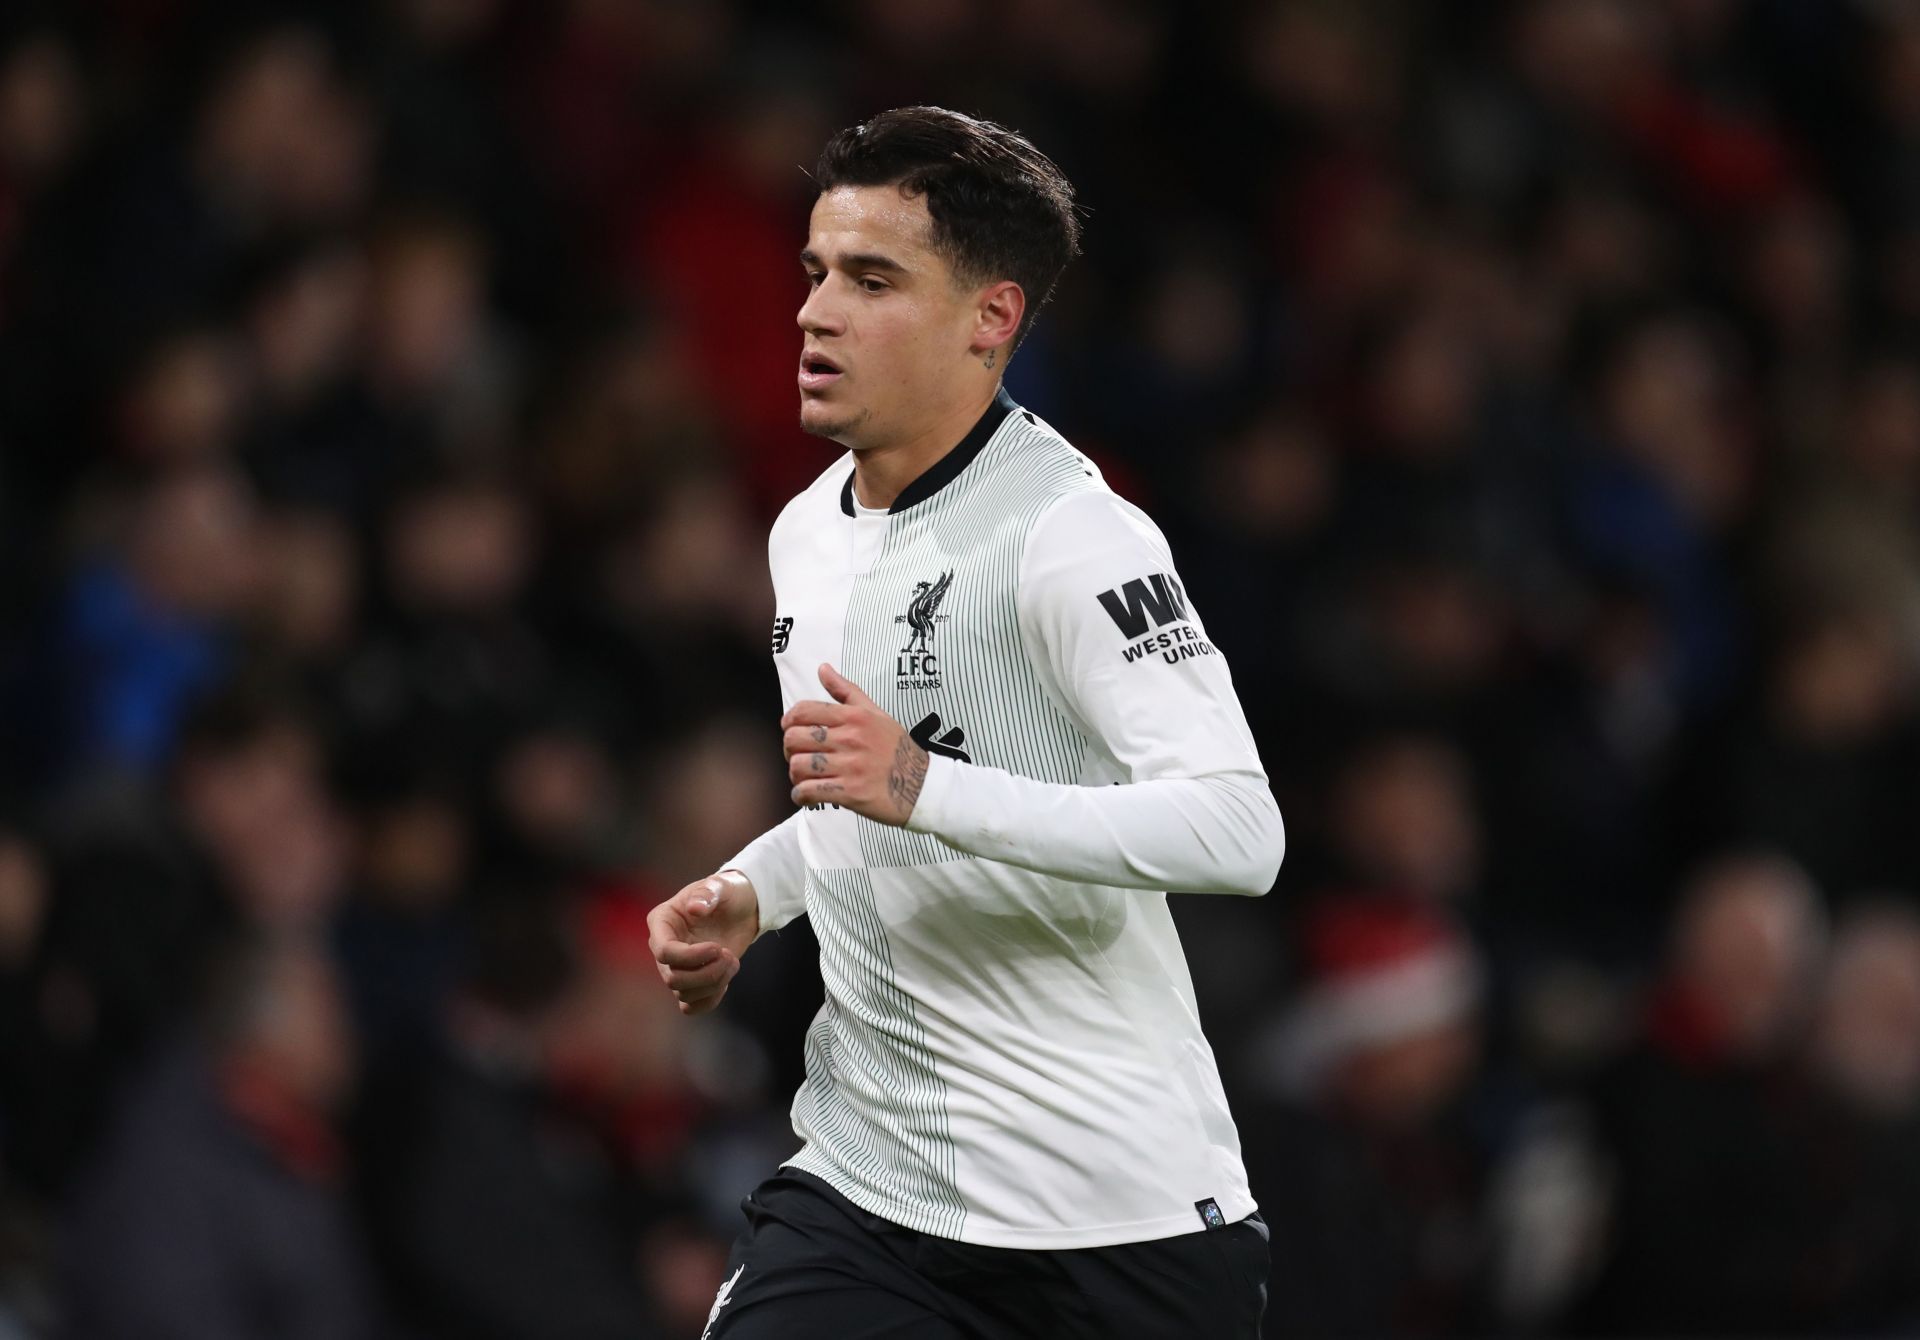 Philippe Coutinho enjoyed the best spell of his career at Liverpool